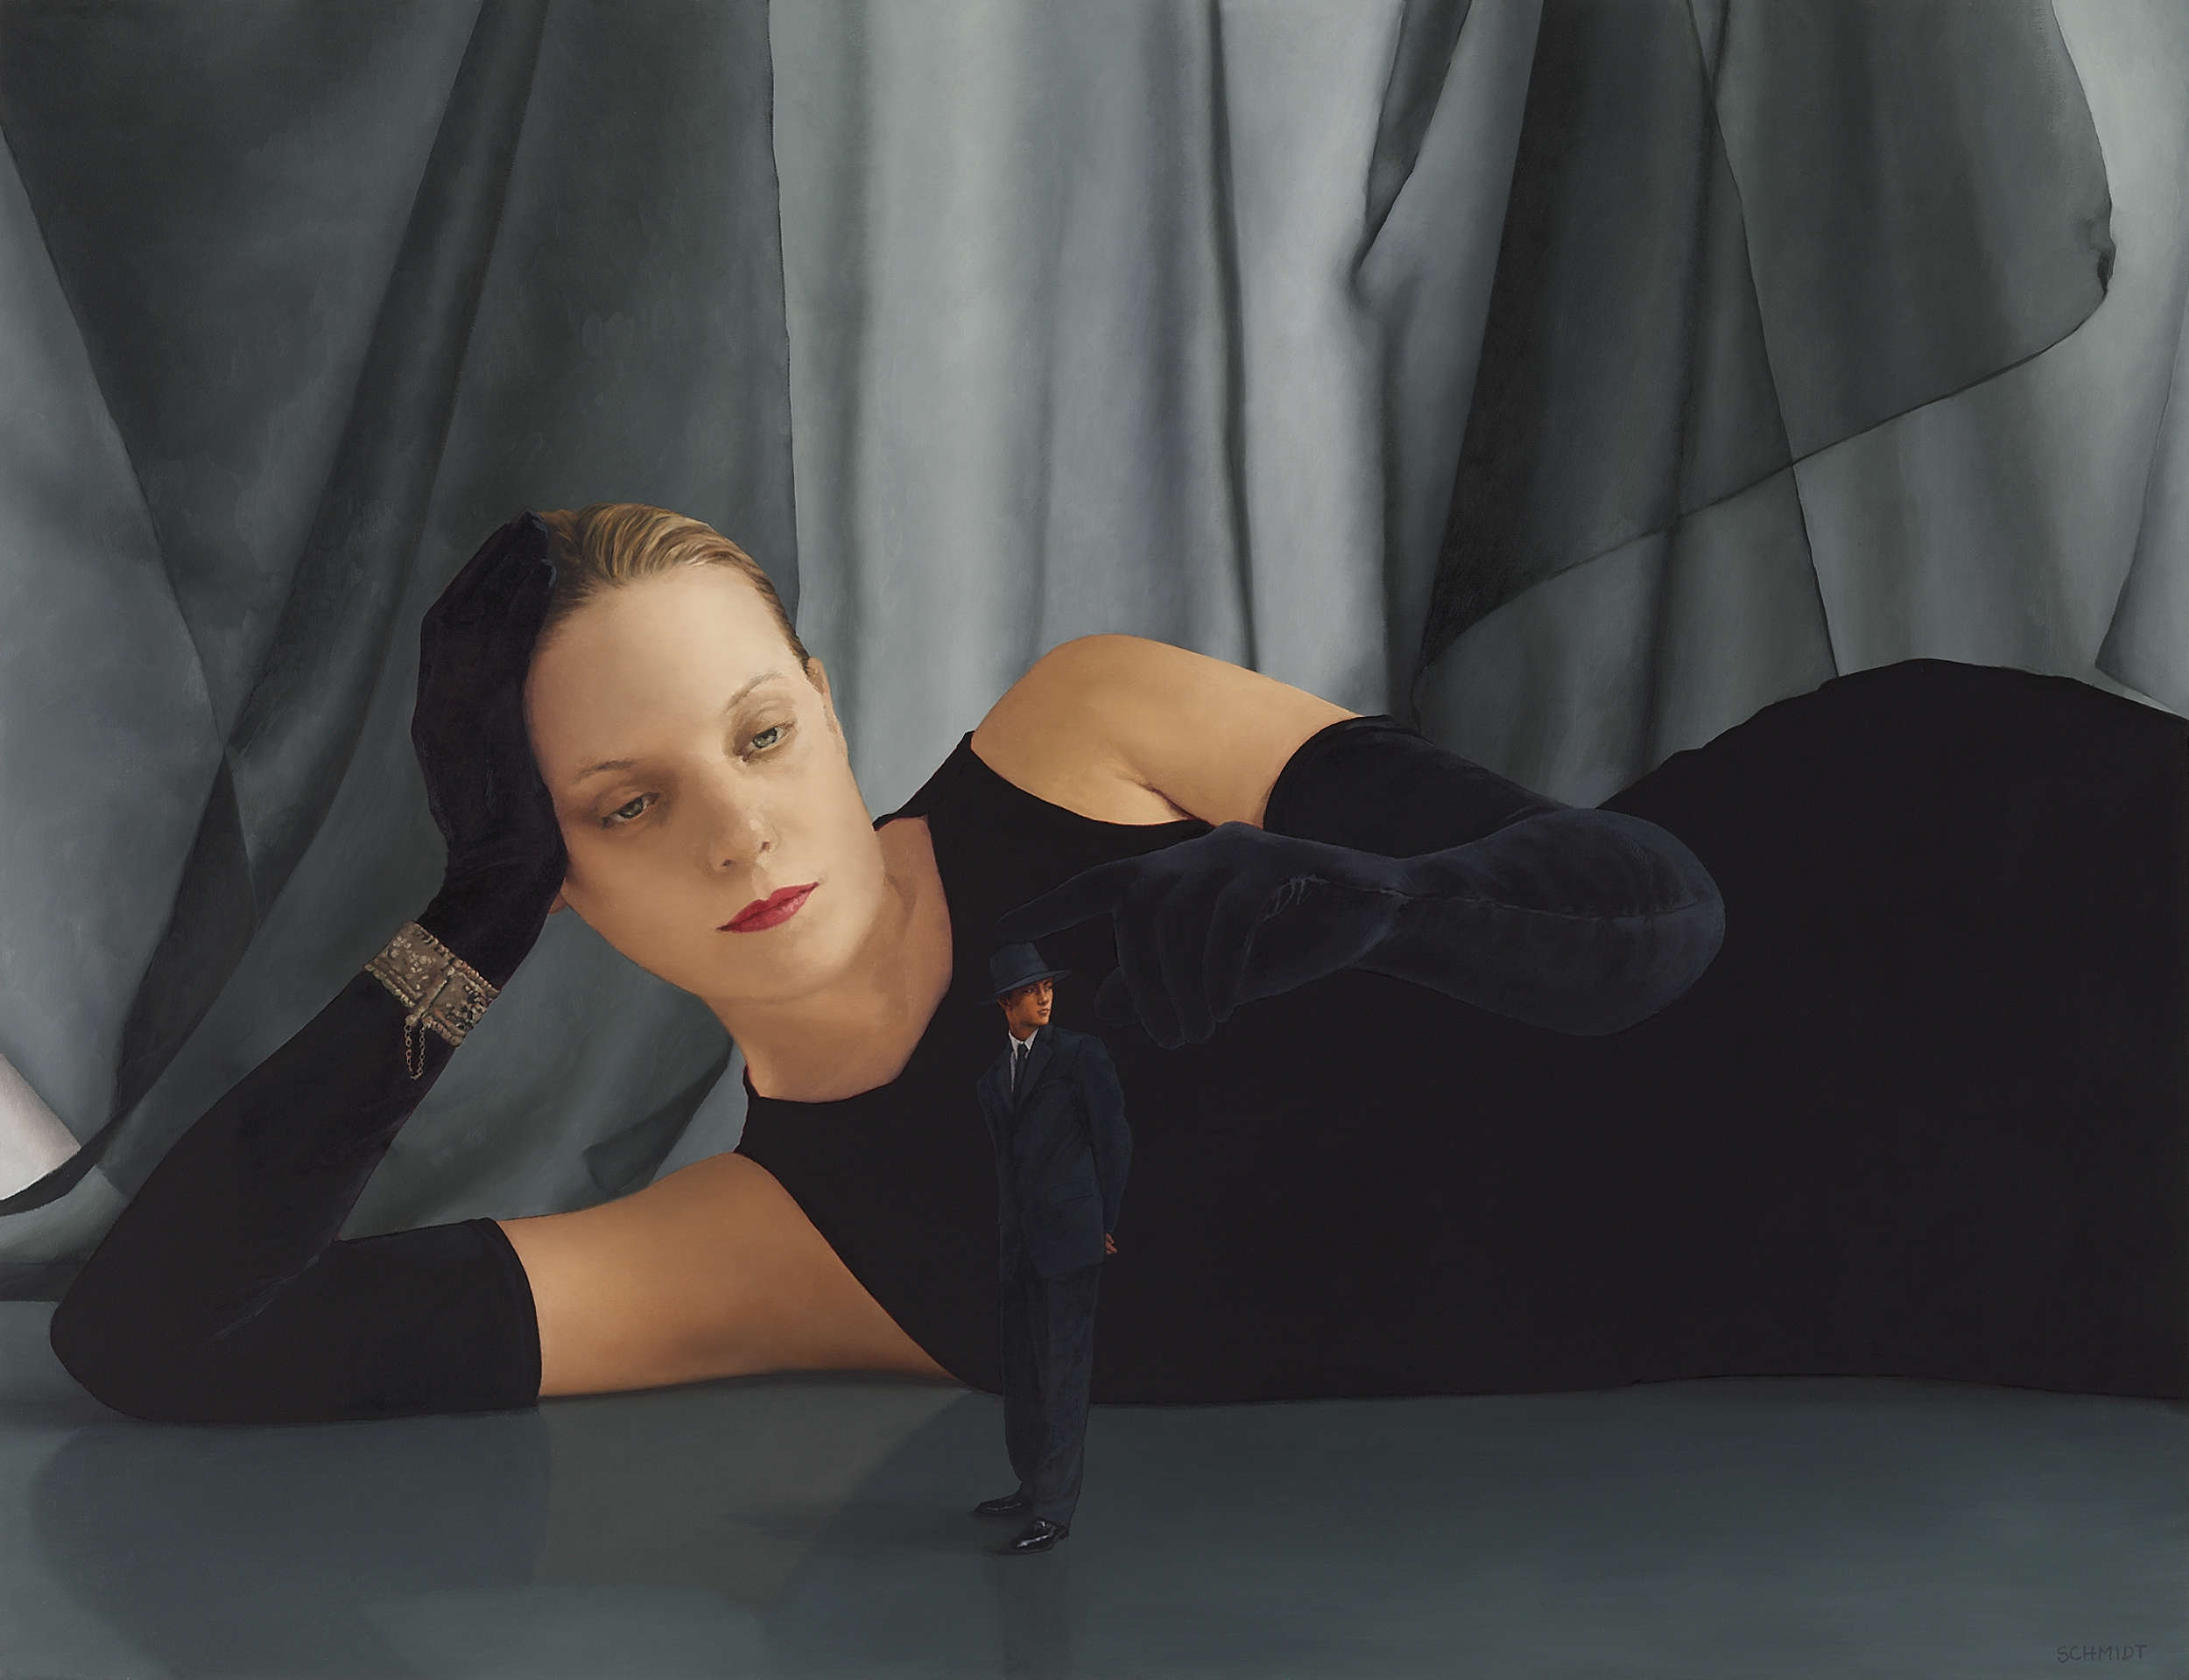 female figure (Cecile) lying on floor wearing black long gloves and a black dress,  diminutive man dressed in a suit and fedora hat  (black transparent fabric behind)